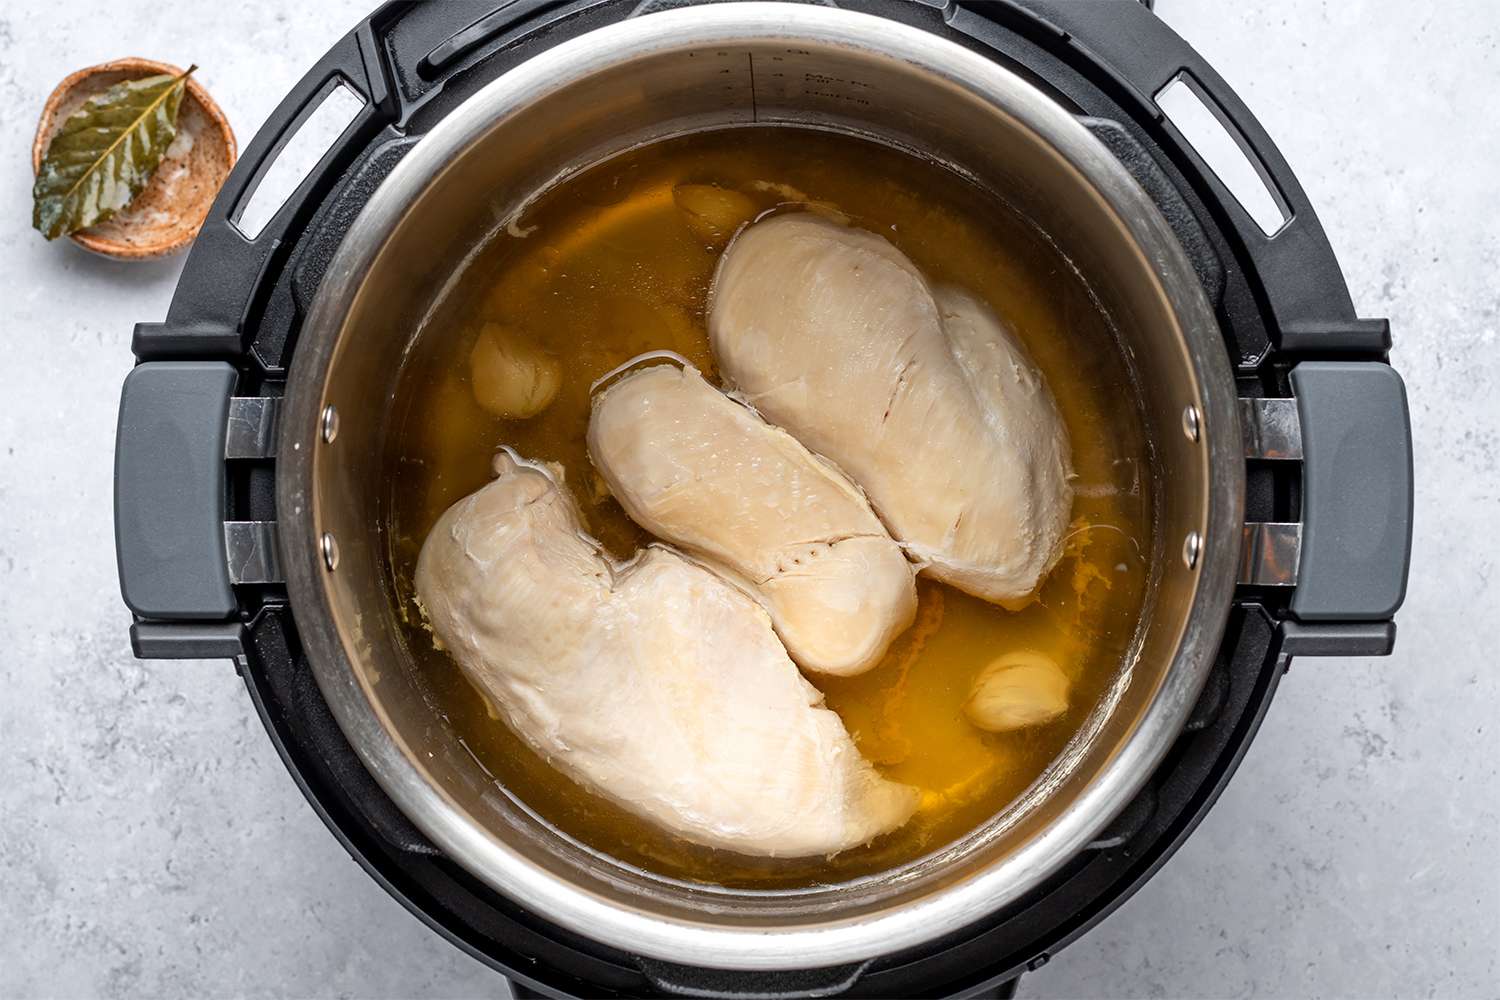 Cooked chicken in an Instant pot